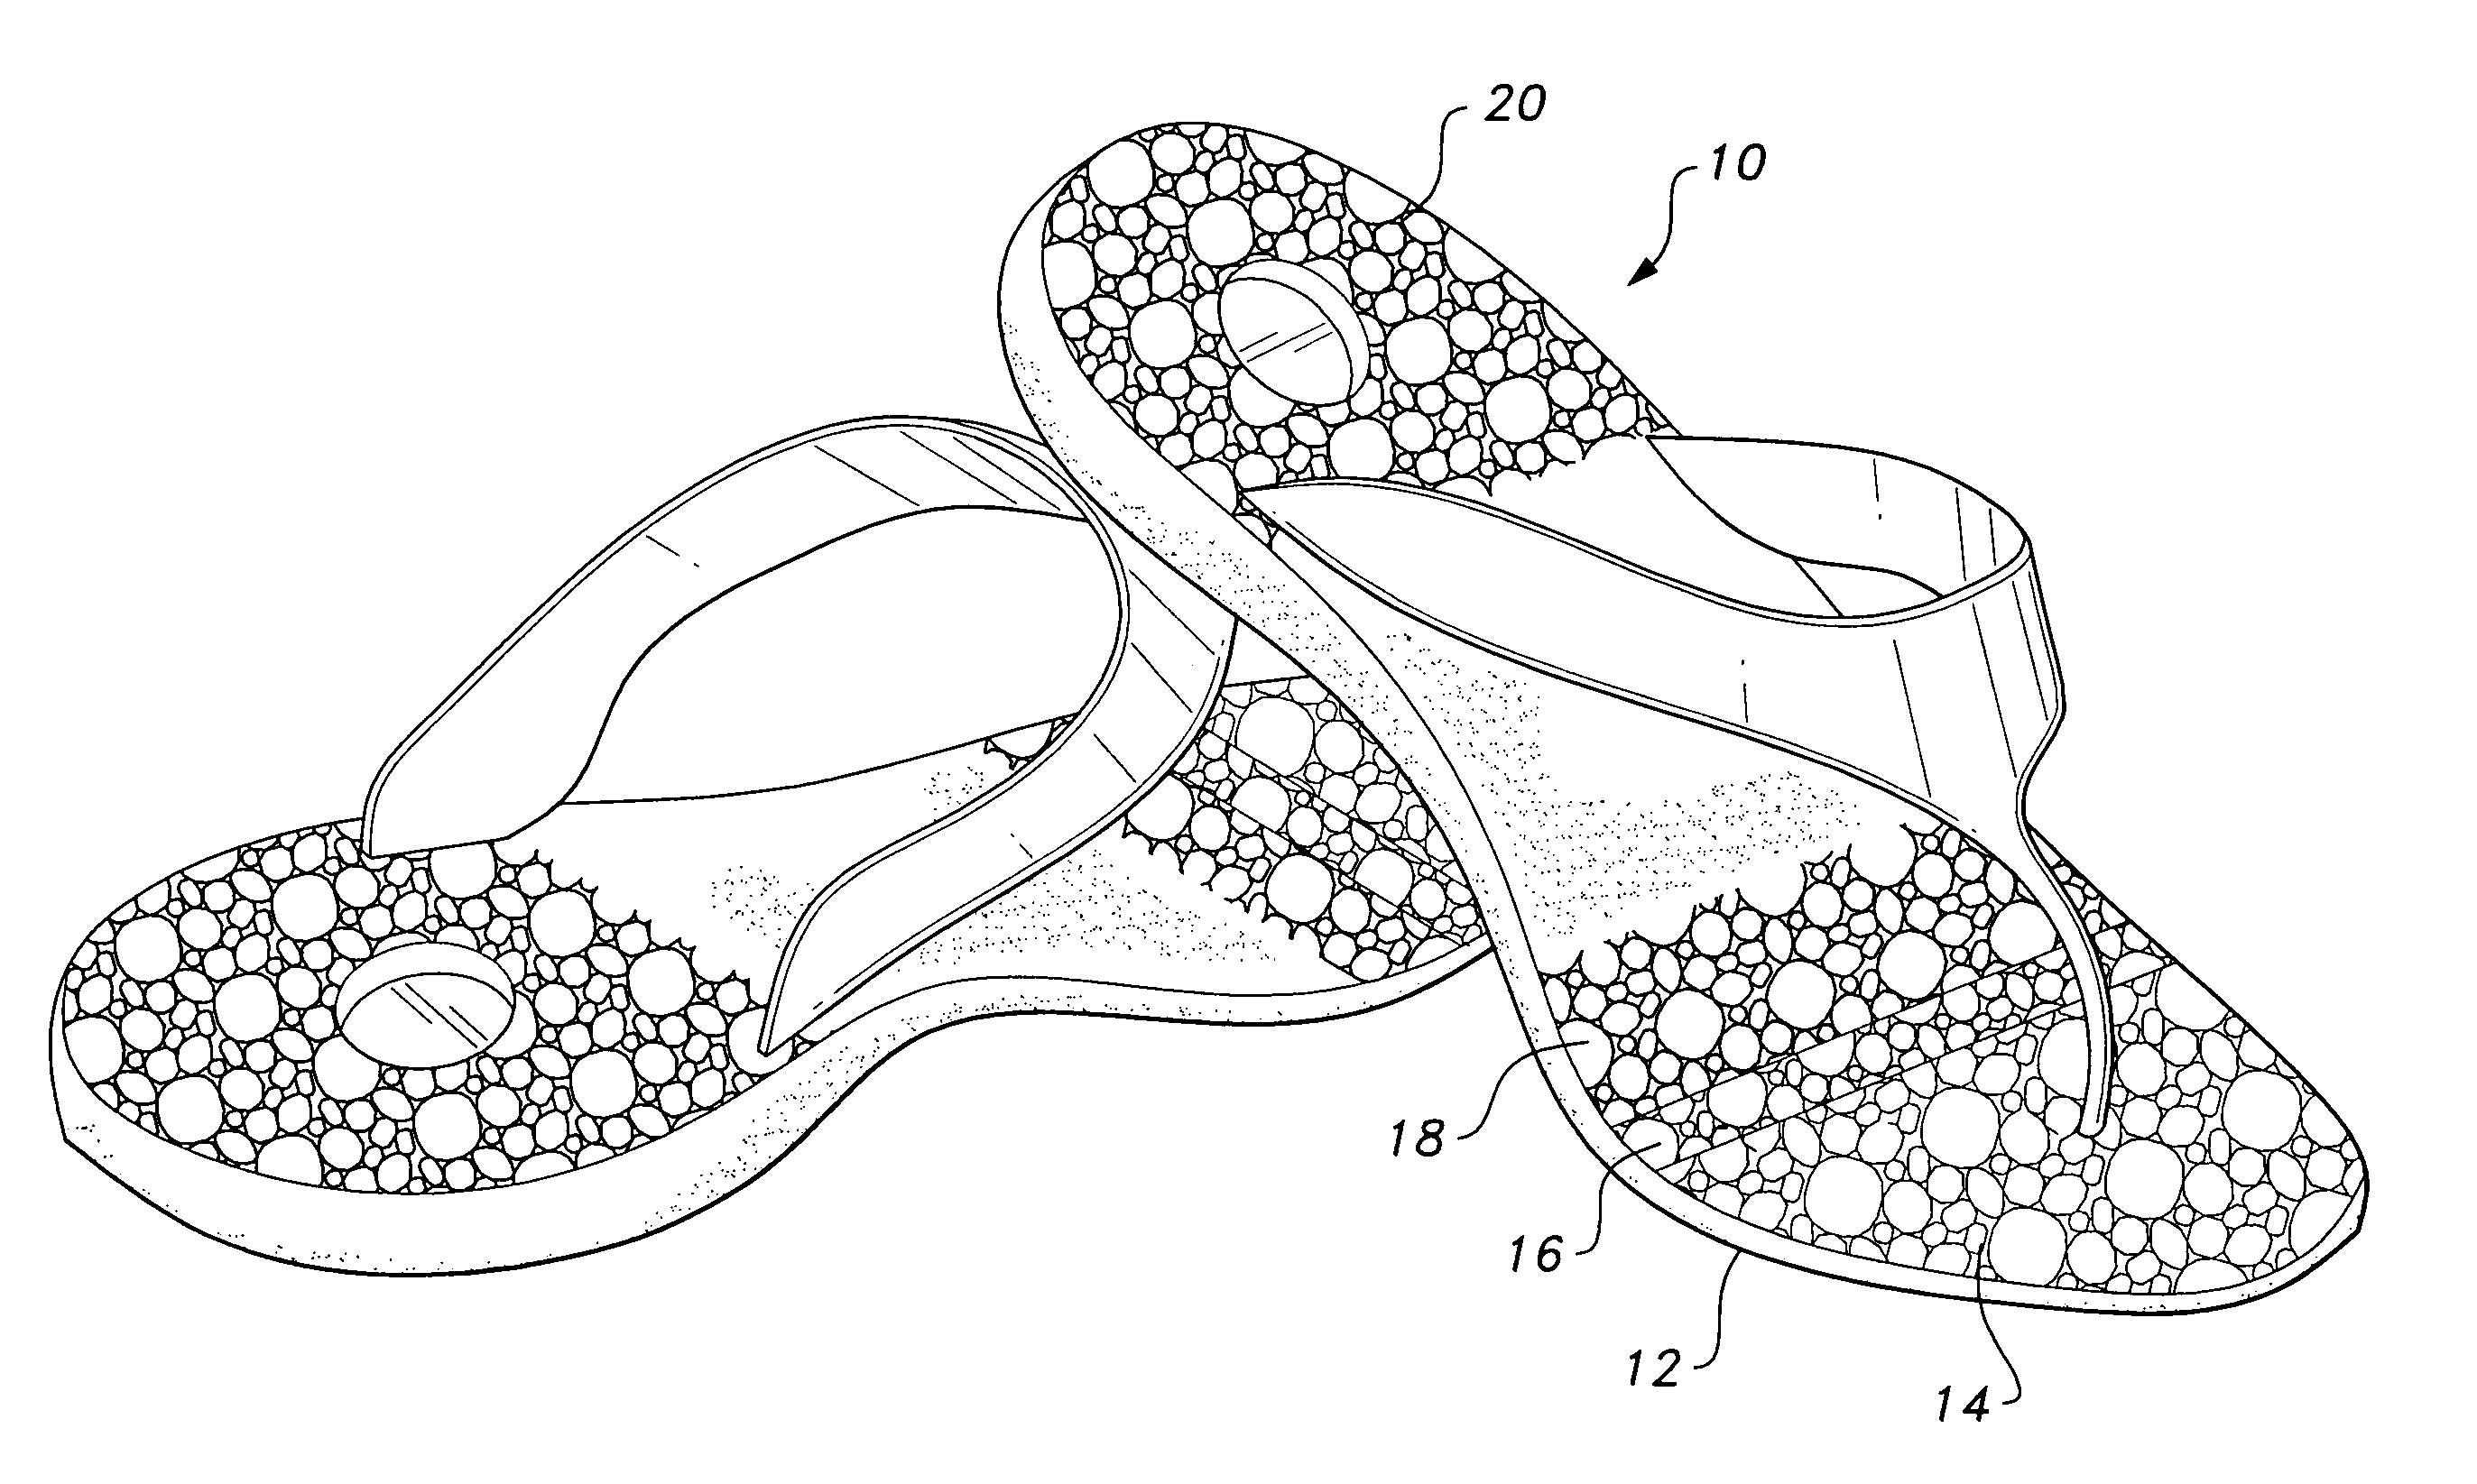 Shoe sole with embedded gemstones